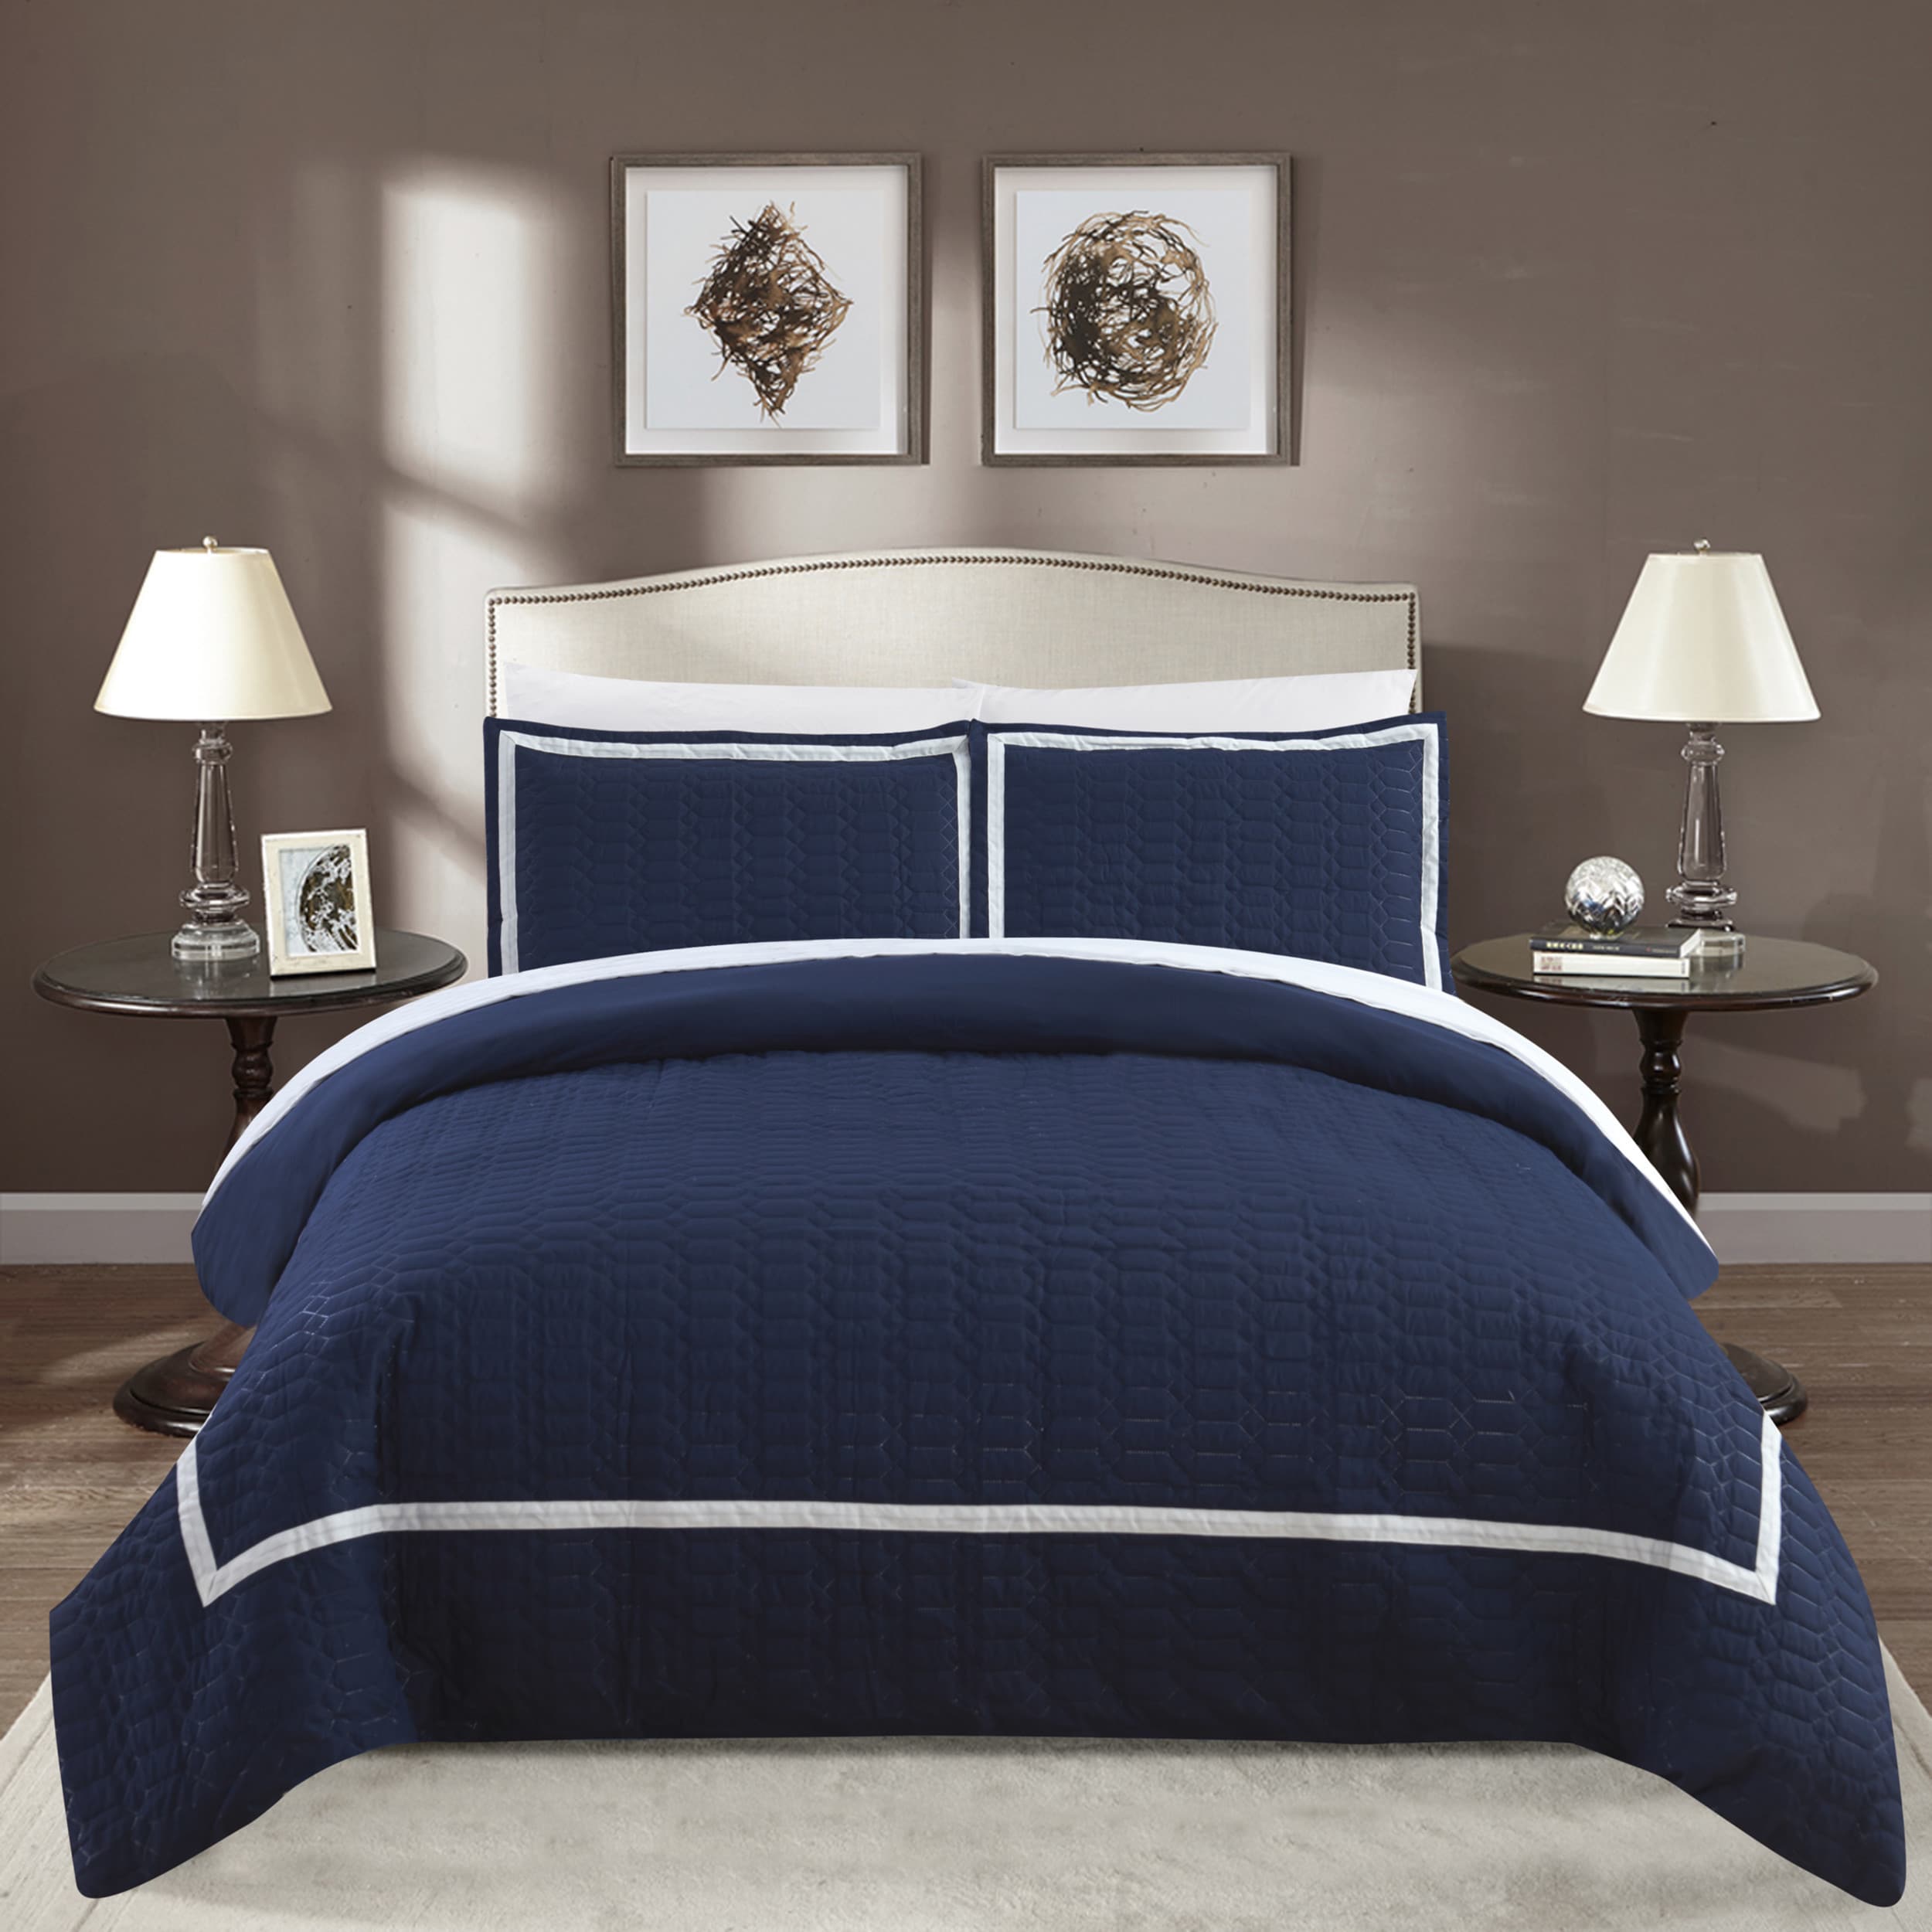 Shop Chic Home Krystel Hotel Collection Navy Banded Print Duvet